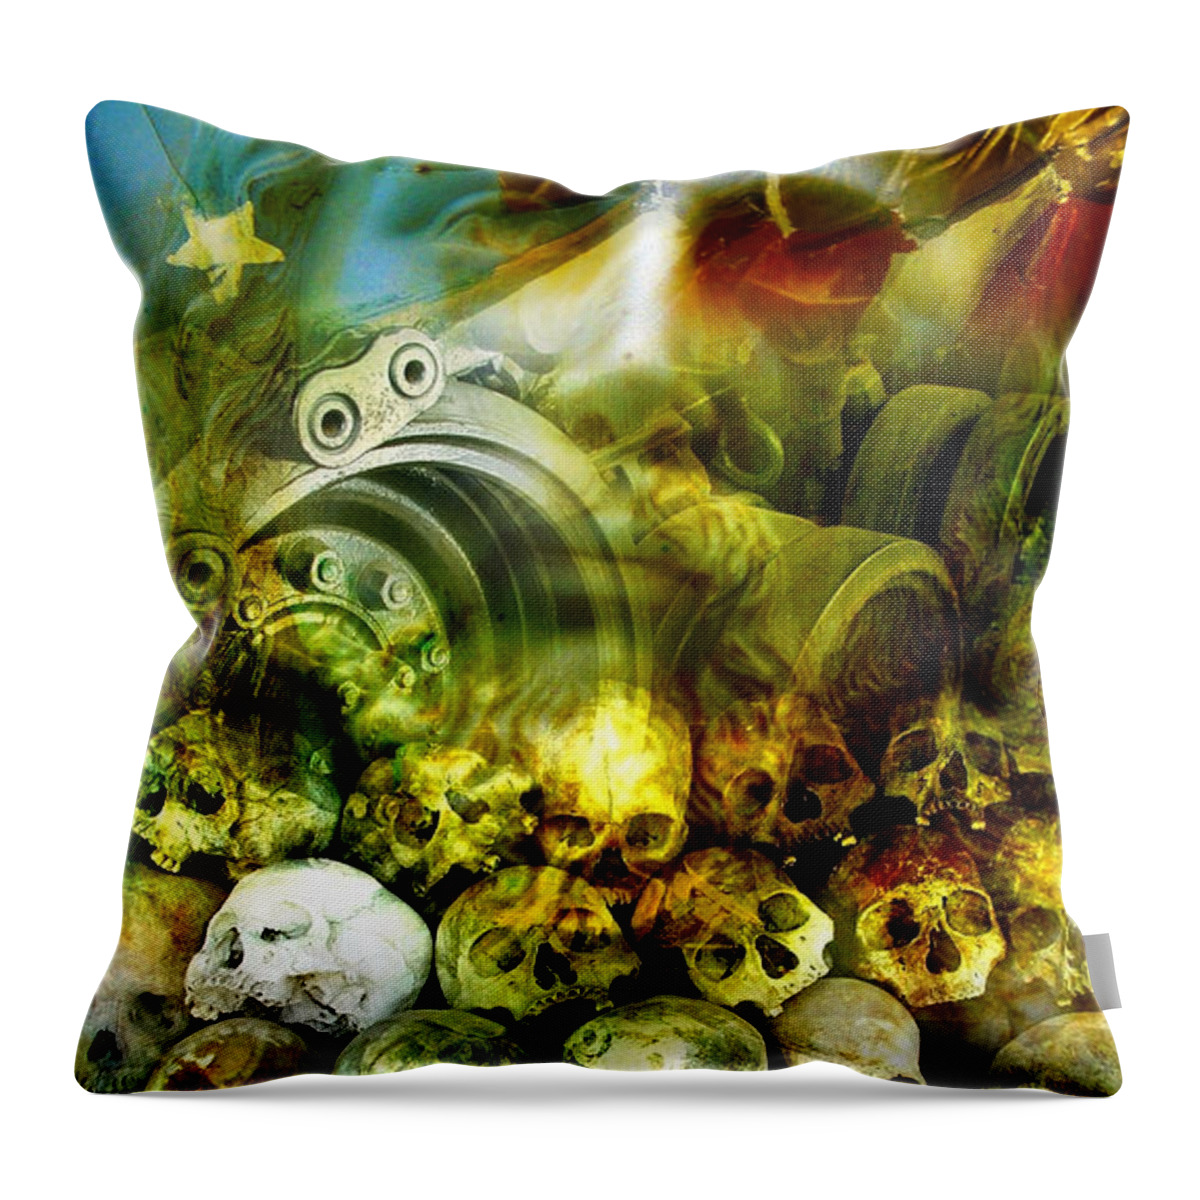 Jesus Throw Pillow featuring the photograph Jesus Wept by Skip Hunt